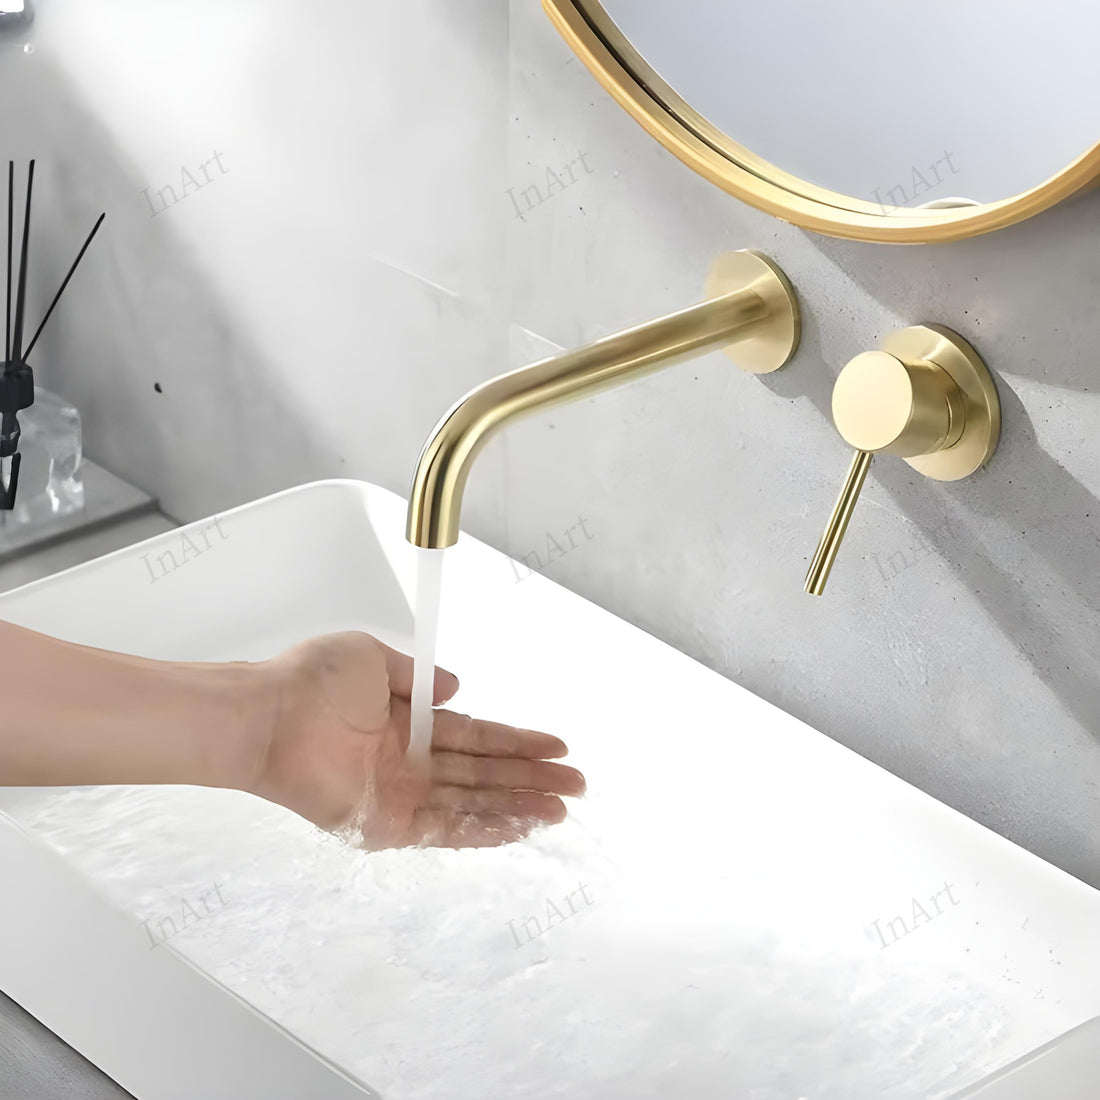 InArt Gold Waterfall Faucet Tap | Wall Mounted Brass Basin Mixer | Concealed Parts | Single Lever | Hot & Cold Water | Modern Design | Brushed Golden Finish WMF004